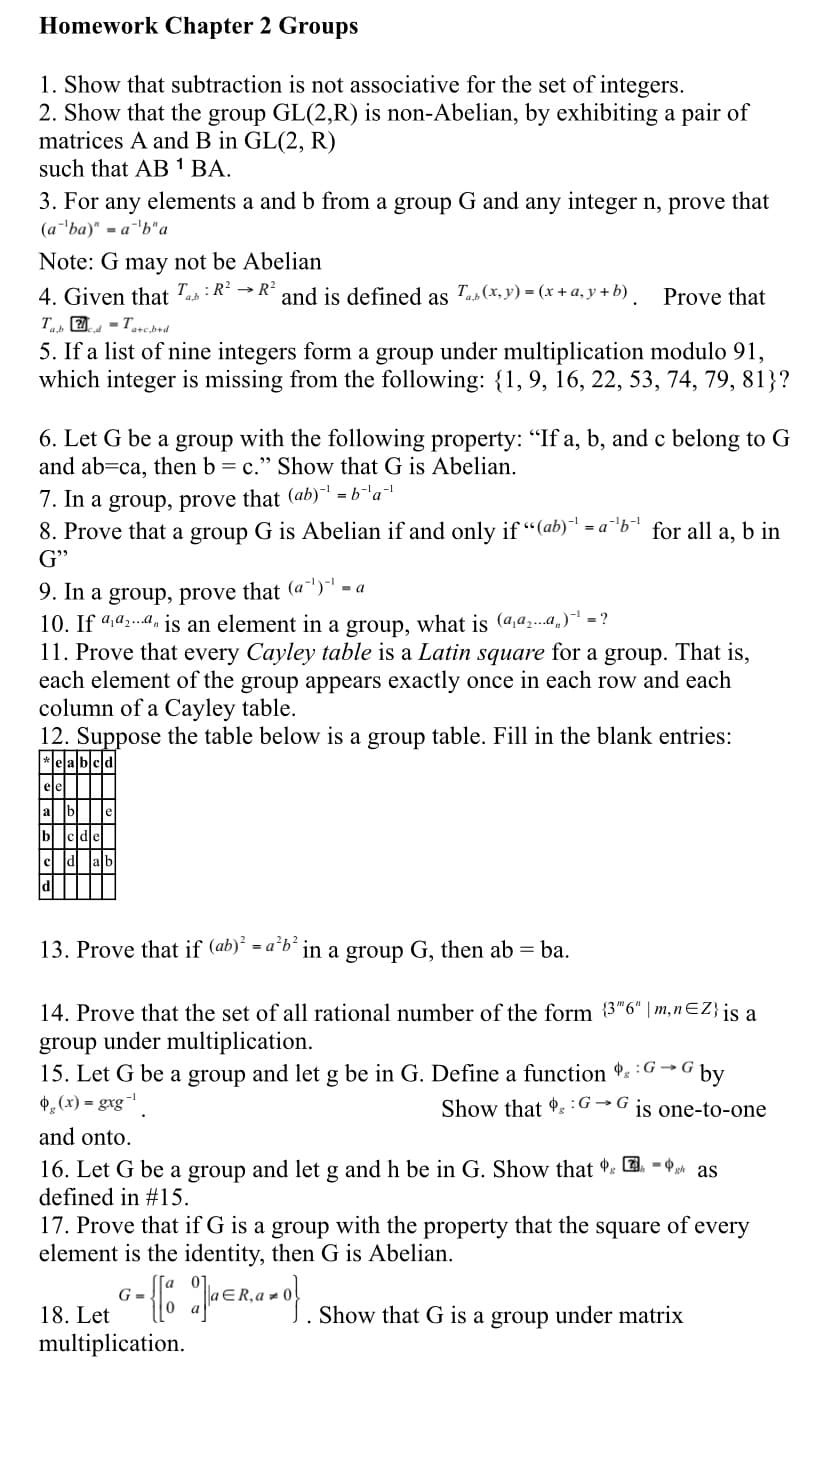 11. Prove that every Cayley table is a Latin square for a group. That is,
each element of the group appears exactly once in each row and each
column of a Cayley table.
